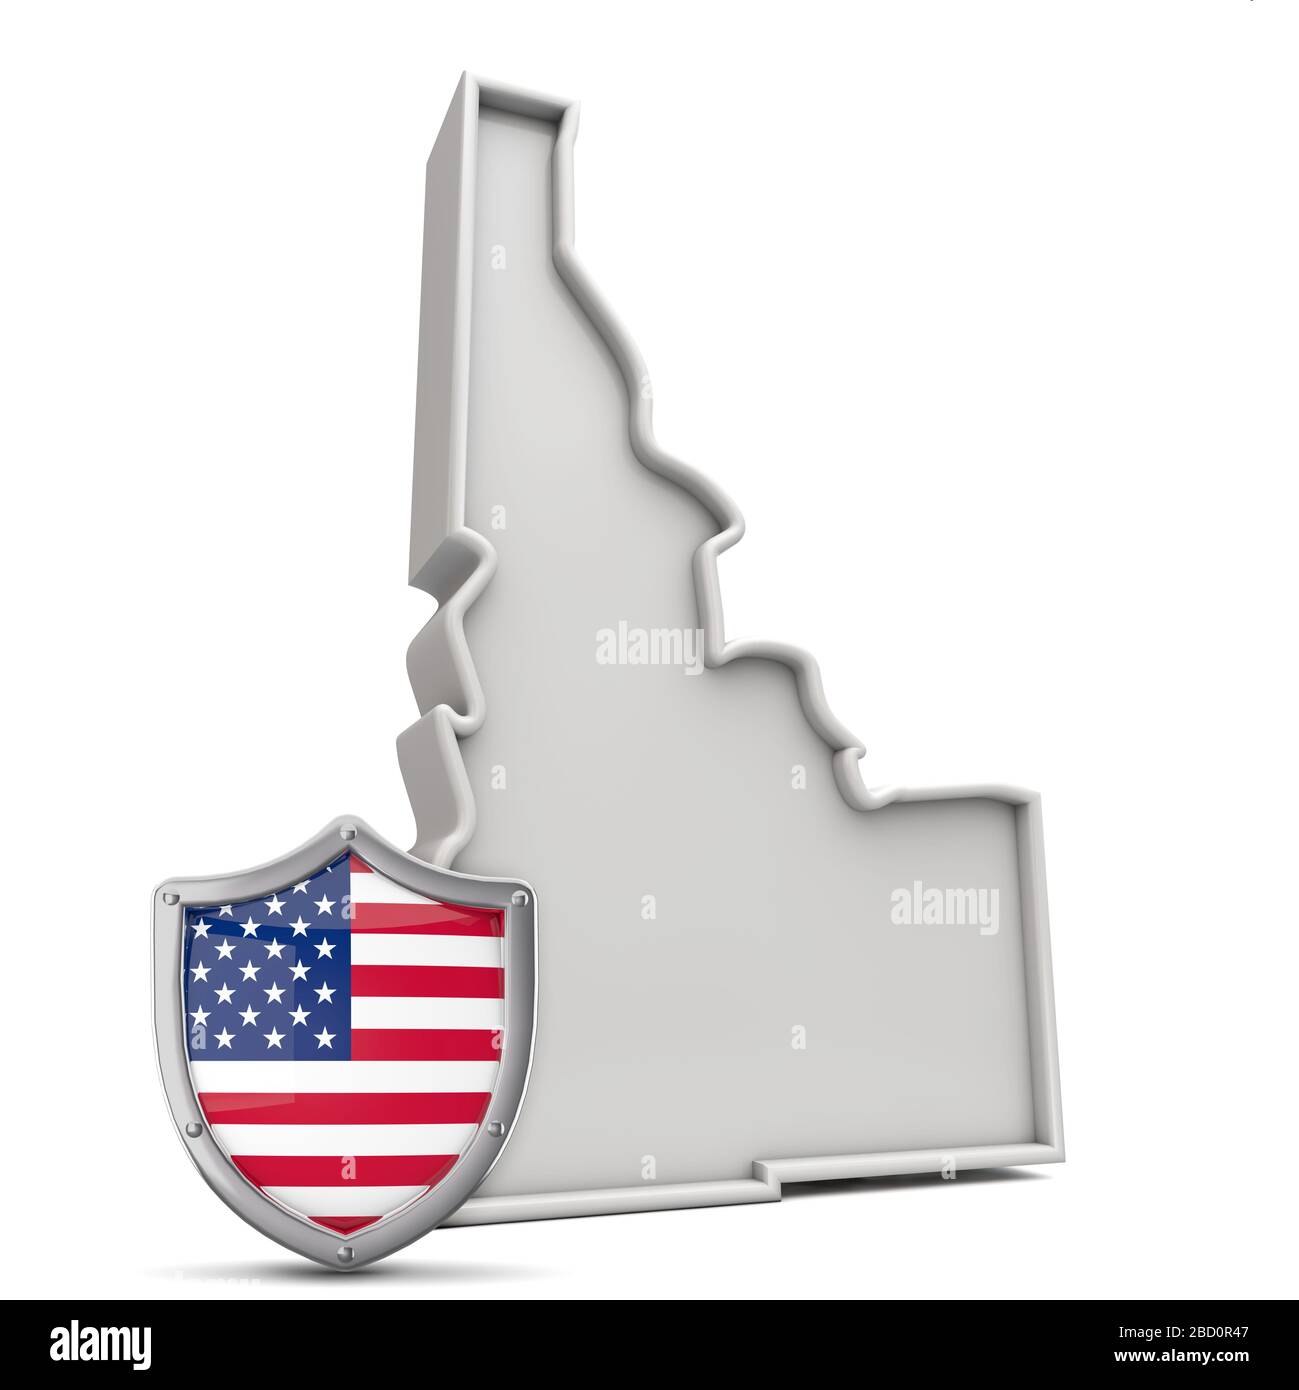 American state of Idaho, with stars and stripes shield. 3D Rendering Stock Photo